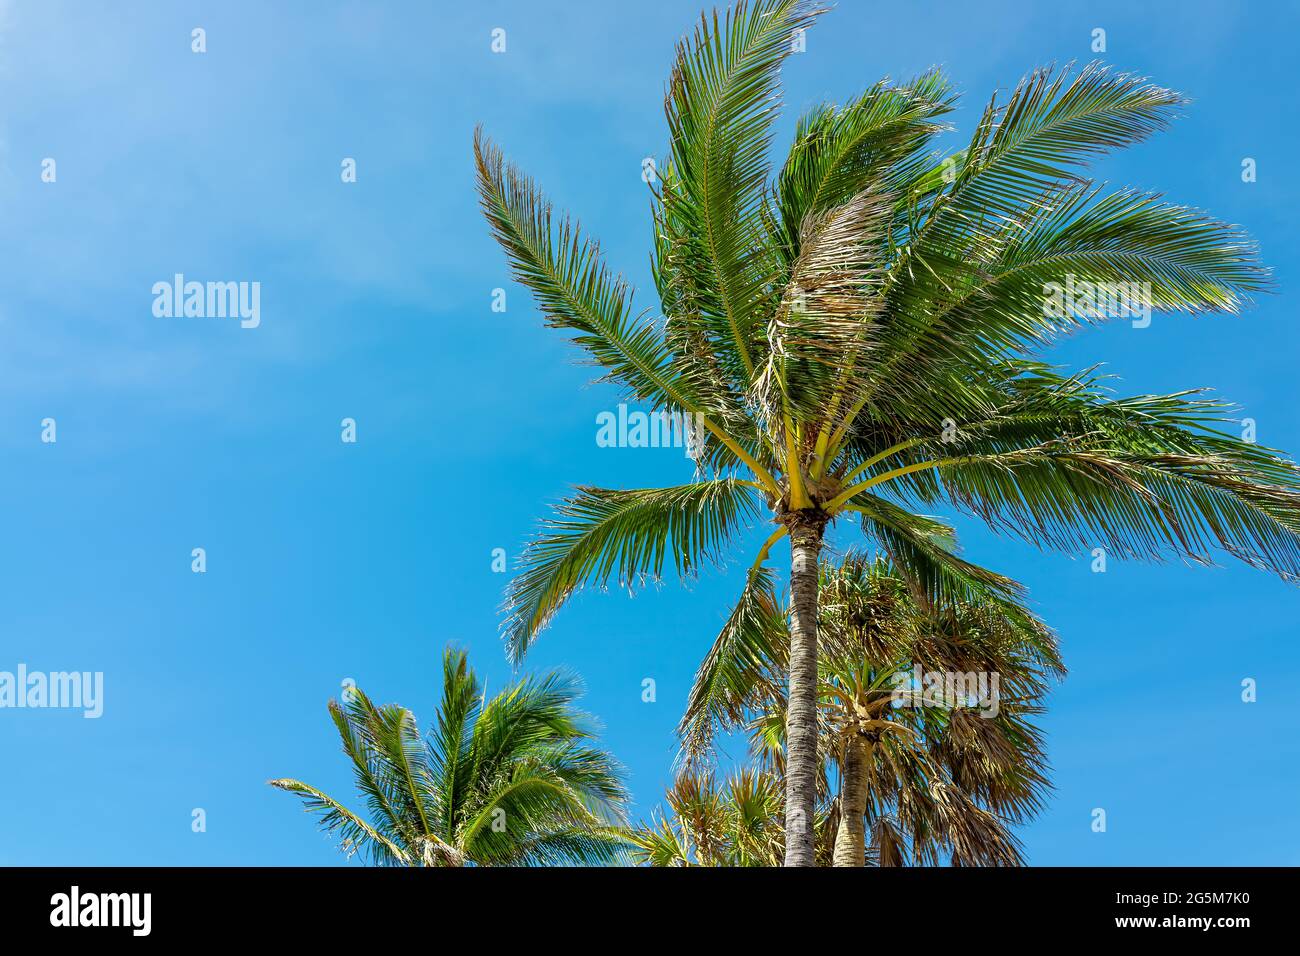 Clorful green orange yellow palm tree and leaves isolated against blue sky in Miami, Florida during sunny day at Hollywood beach broadwalk Stock Photo